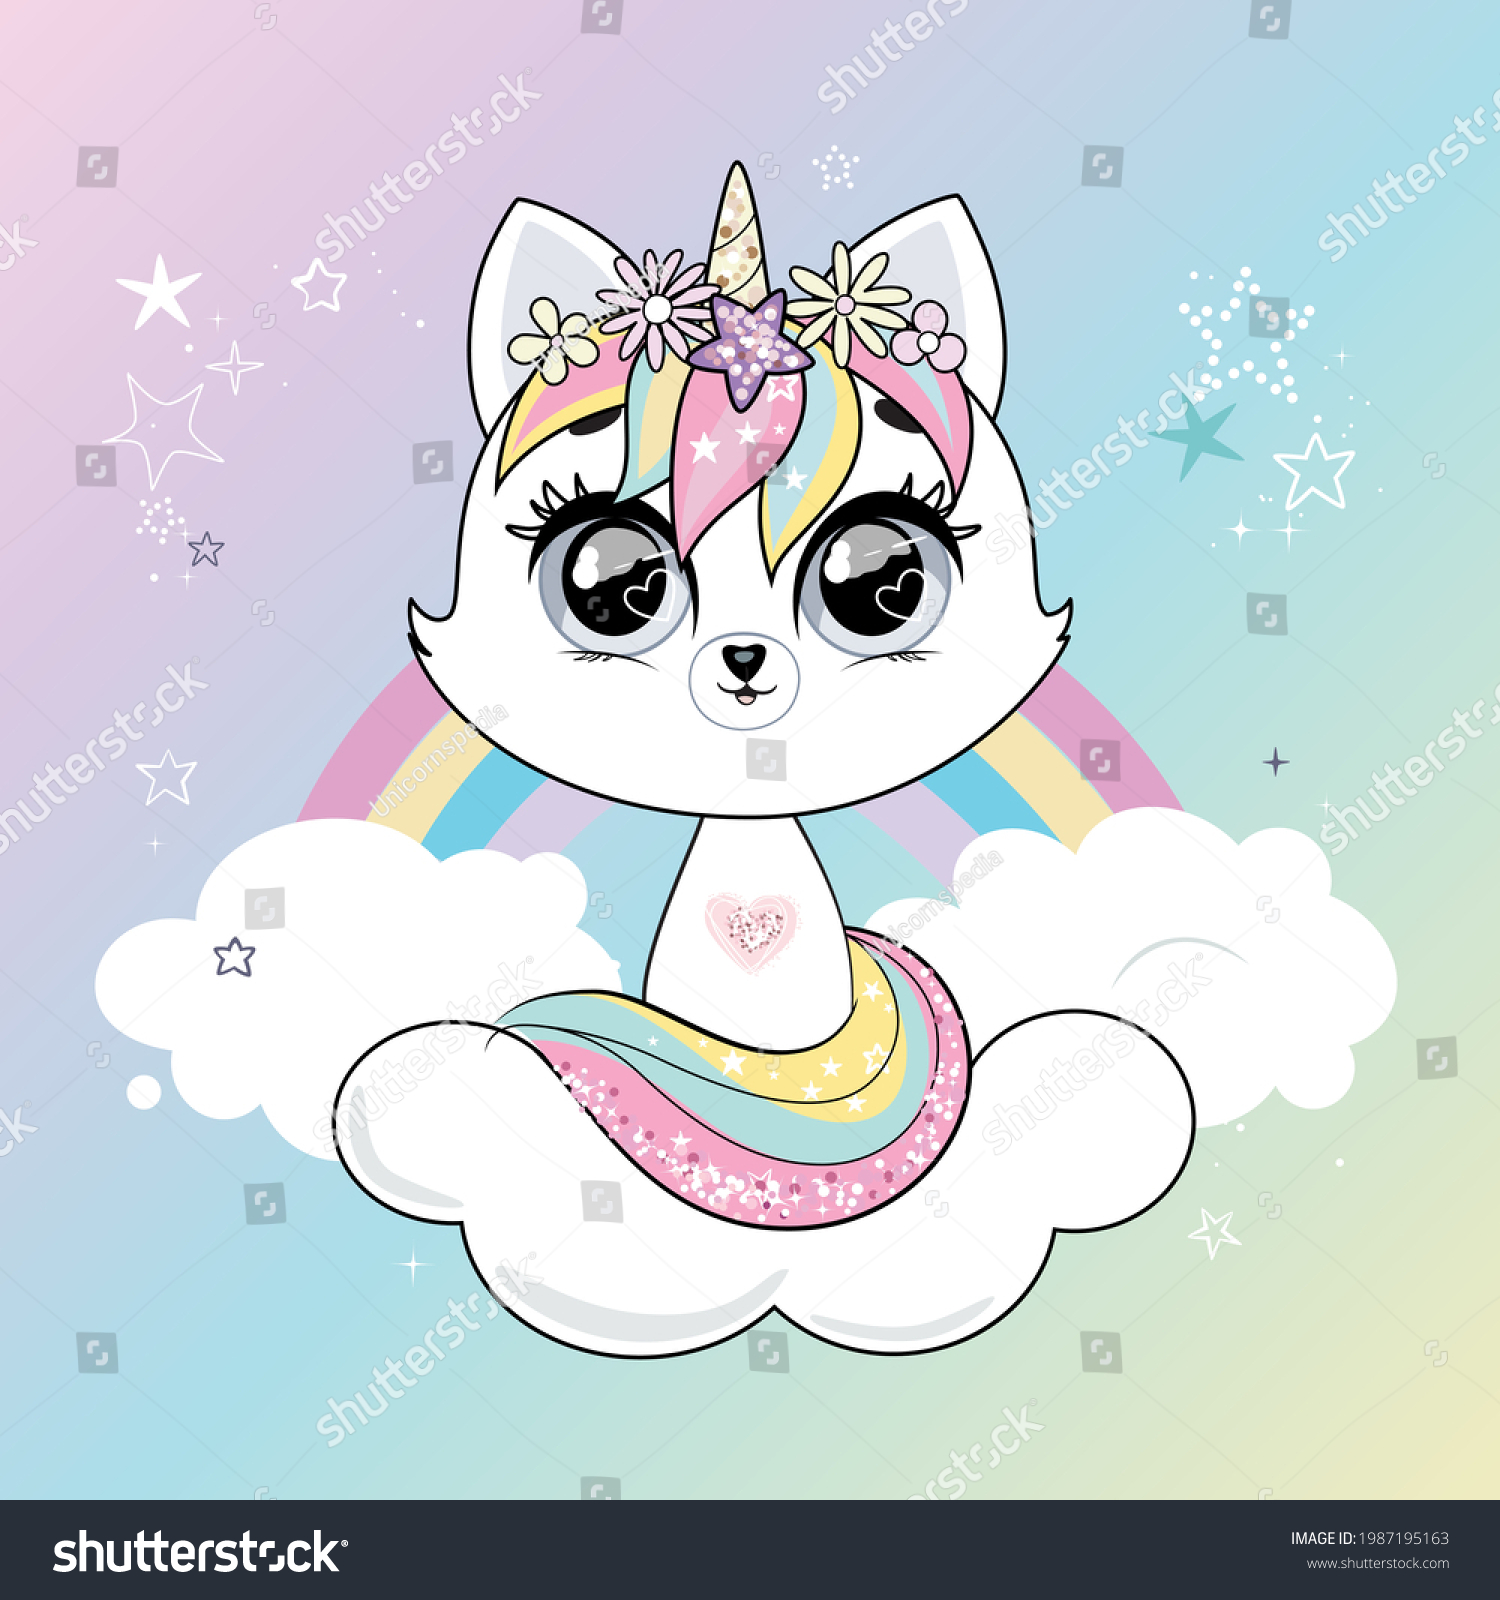 SVG of Cute little white cat unicorn or caticorn over background with rainbow. Pastel soft colors. Vector. svg